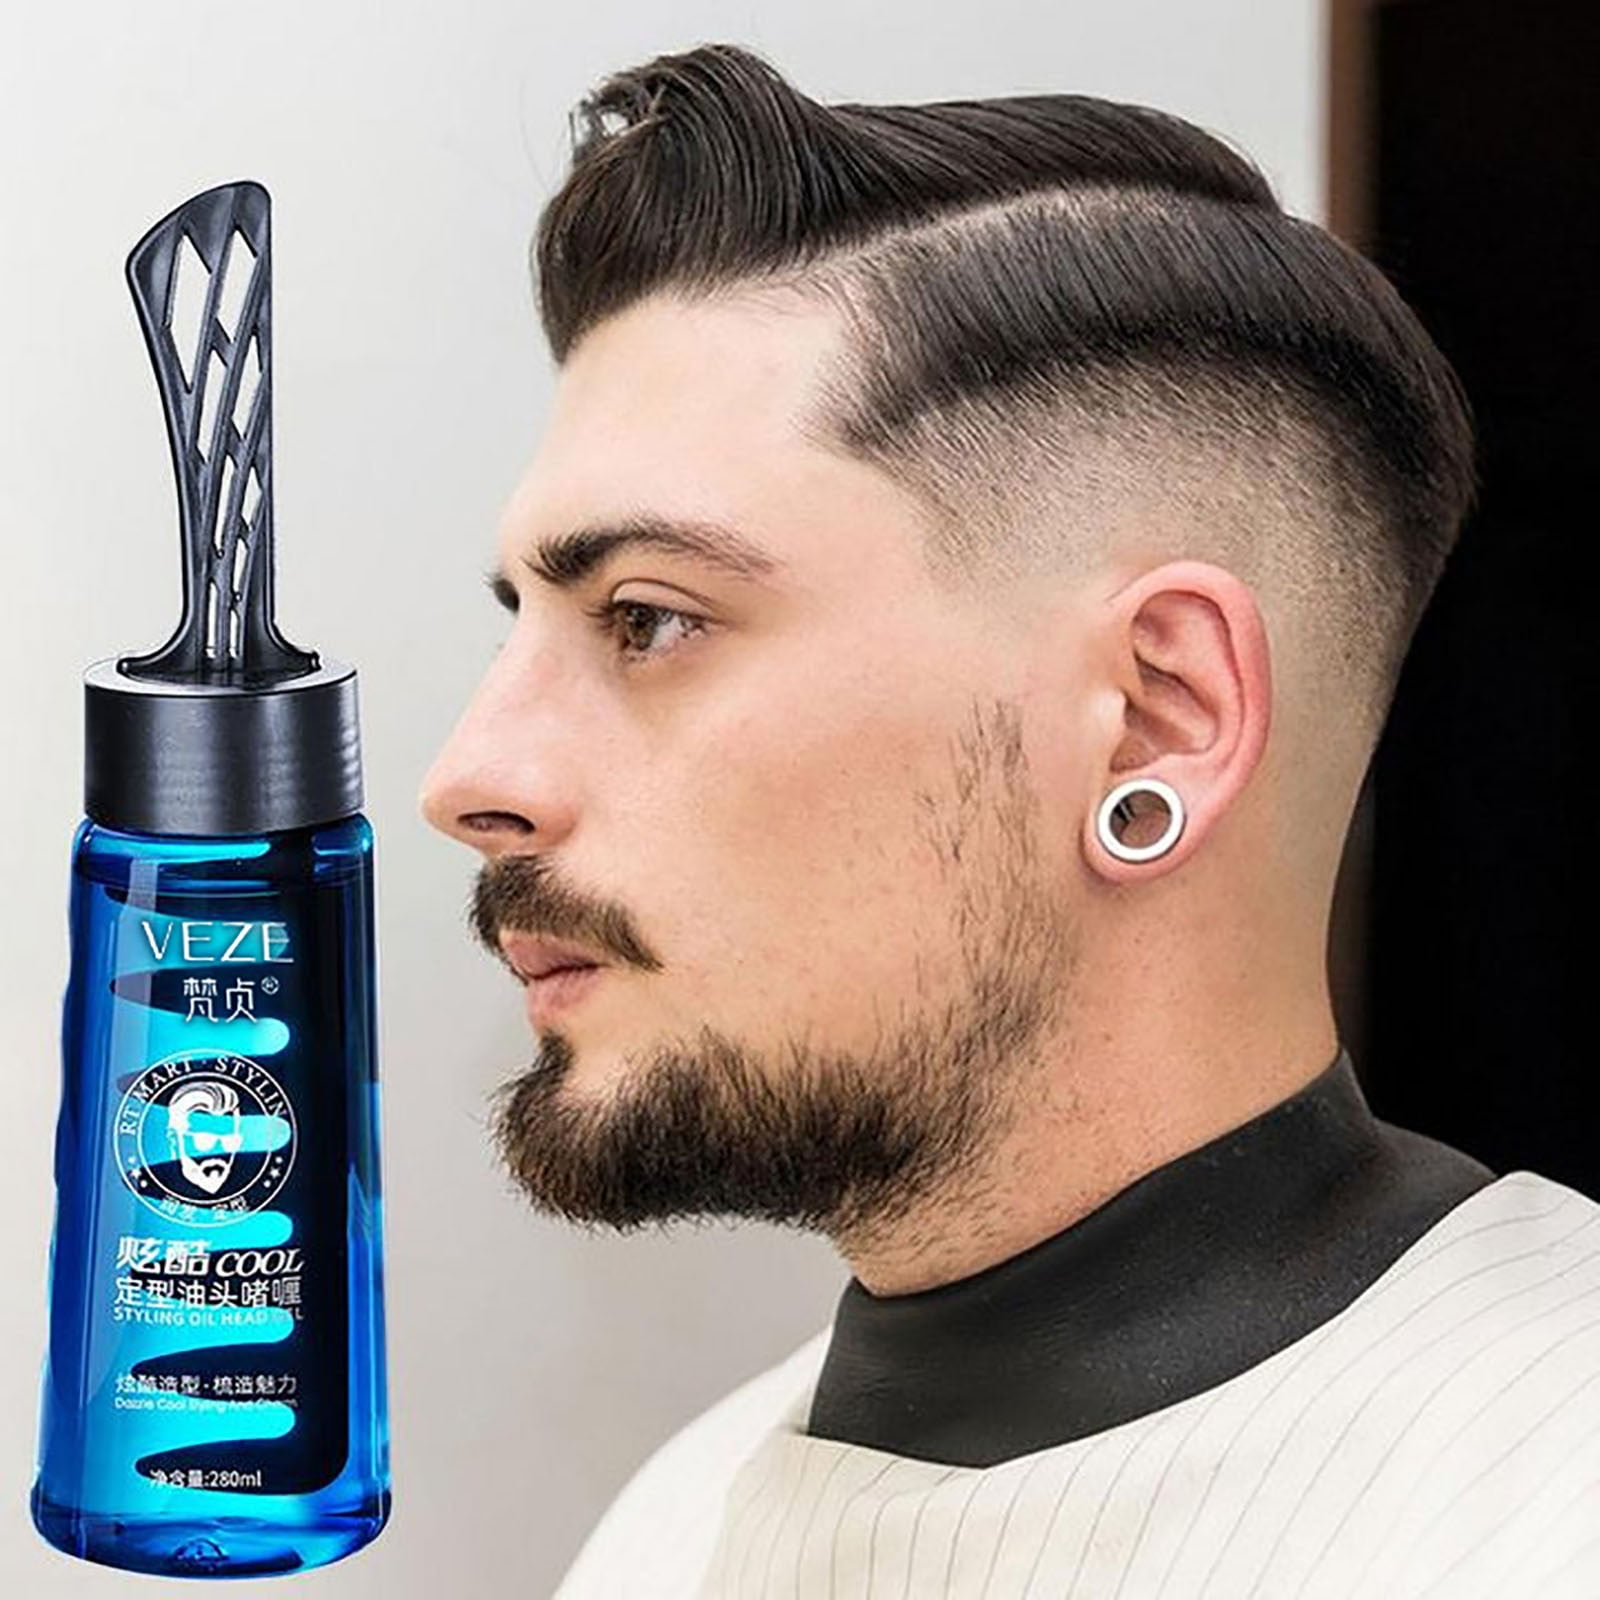 Banghong 2 In 1 Men Hair Wax Gel With Comb New Styling Strong Firm Hold For Side Part Pompadour Slick Back Looks Easy To Wash Out Man 280ML 3d250140 58a0 4401 8f0b 9e6eccea22f3.c8eb4a5abe8b1e7dba2bf2f8432fcd57